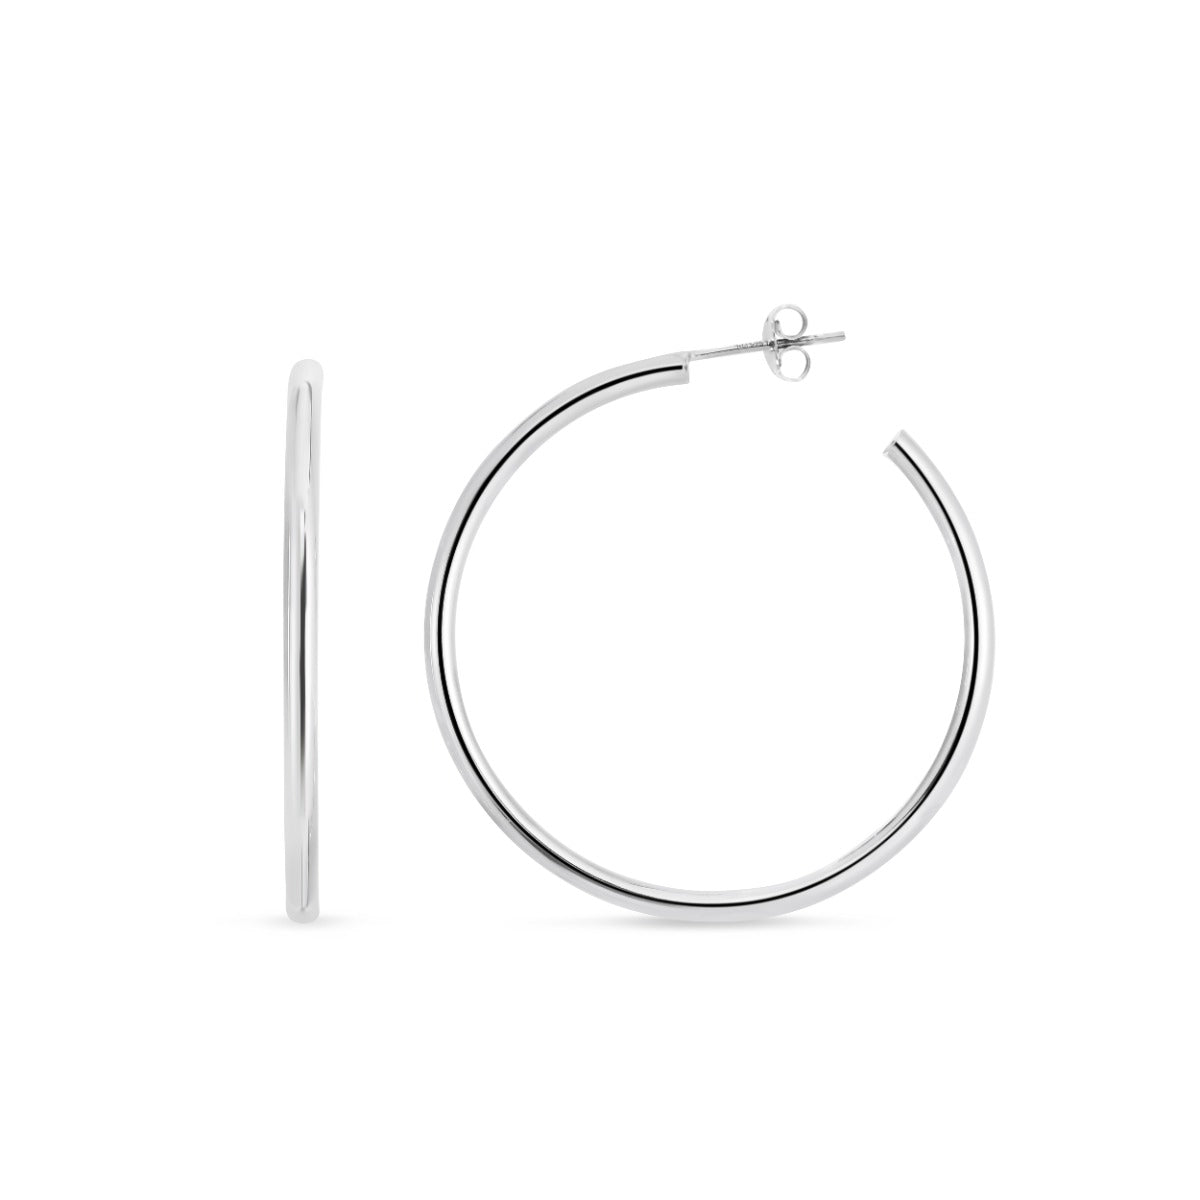 Sterling Silver Polished Round Tube C Hoops with Push Back closure.